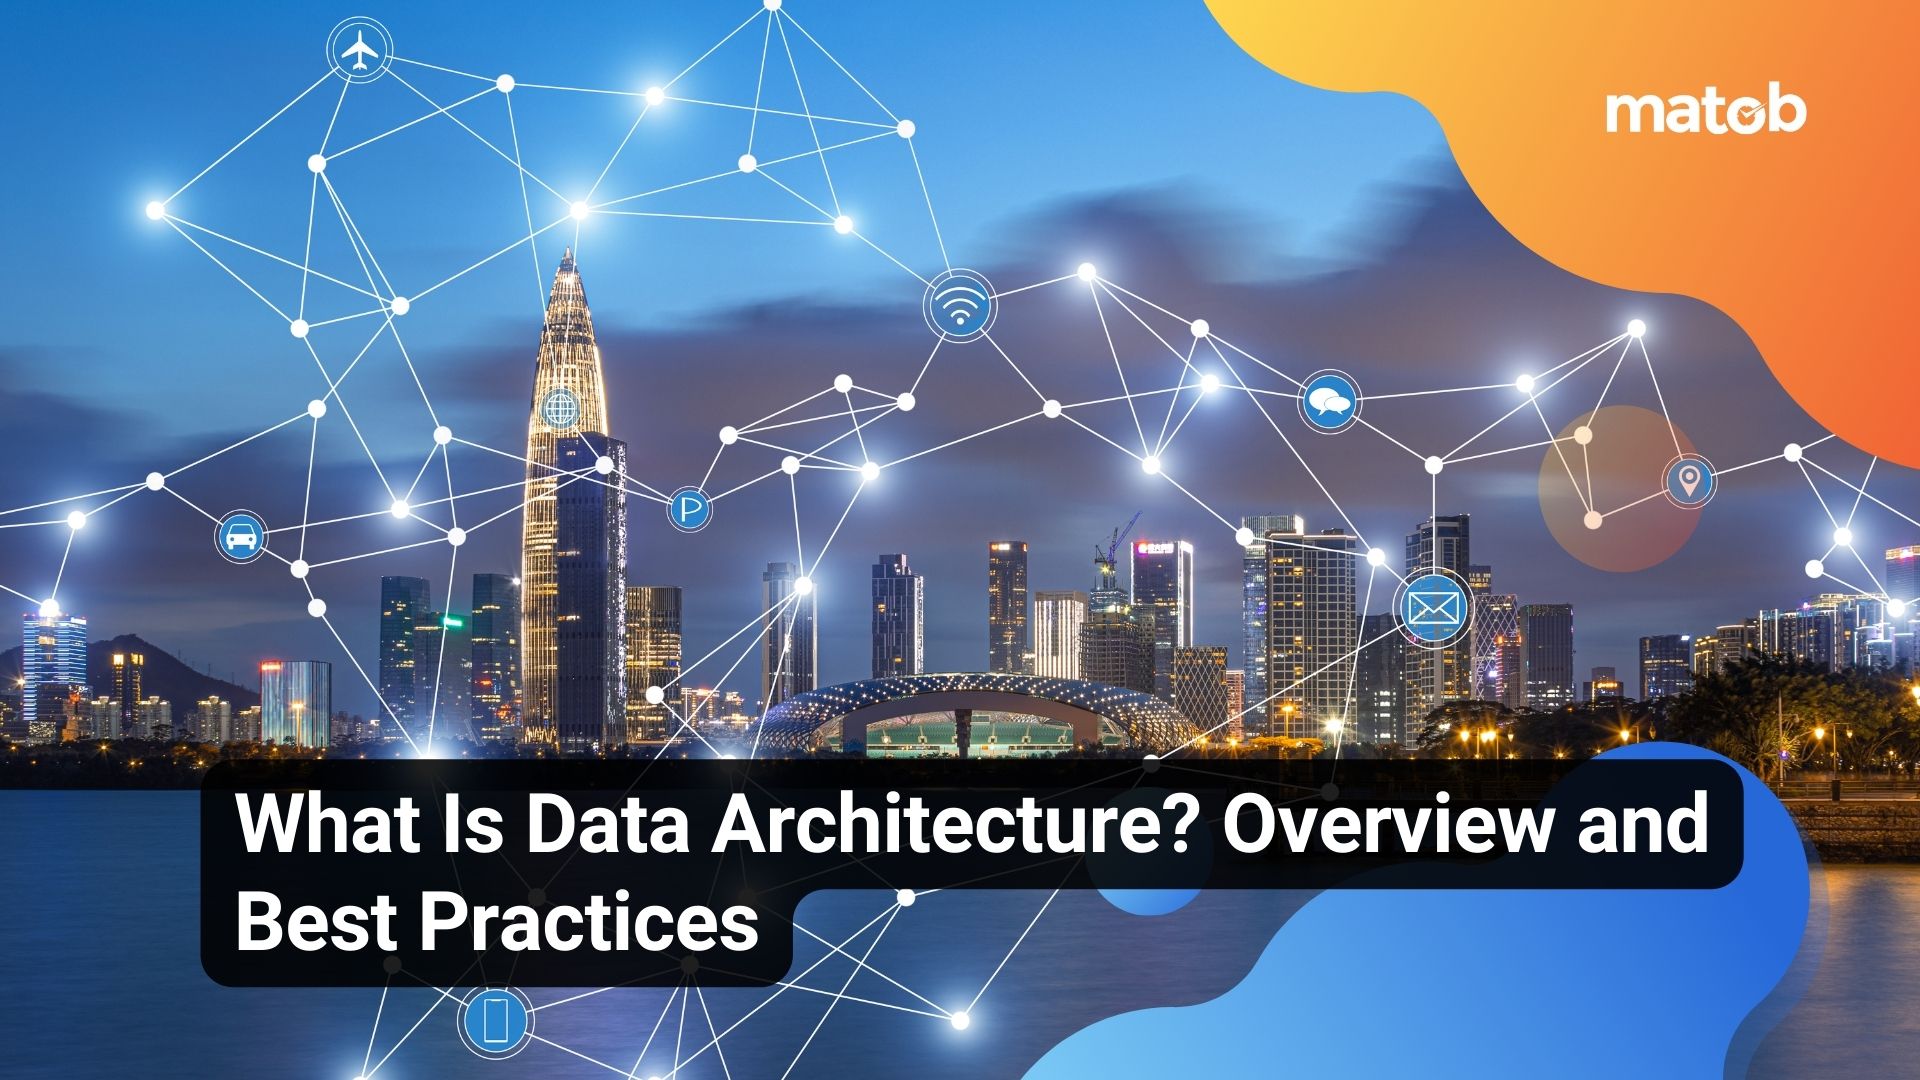 What Is Data Architecture? Overview and Best Practices